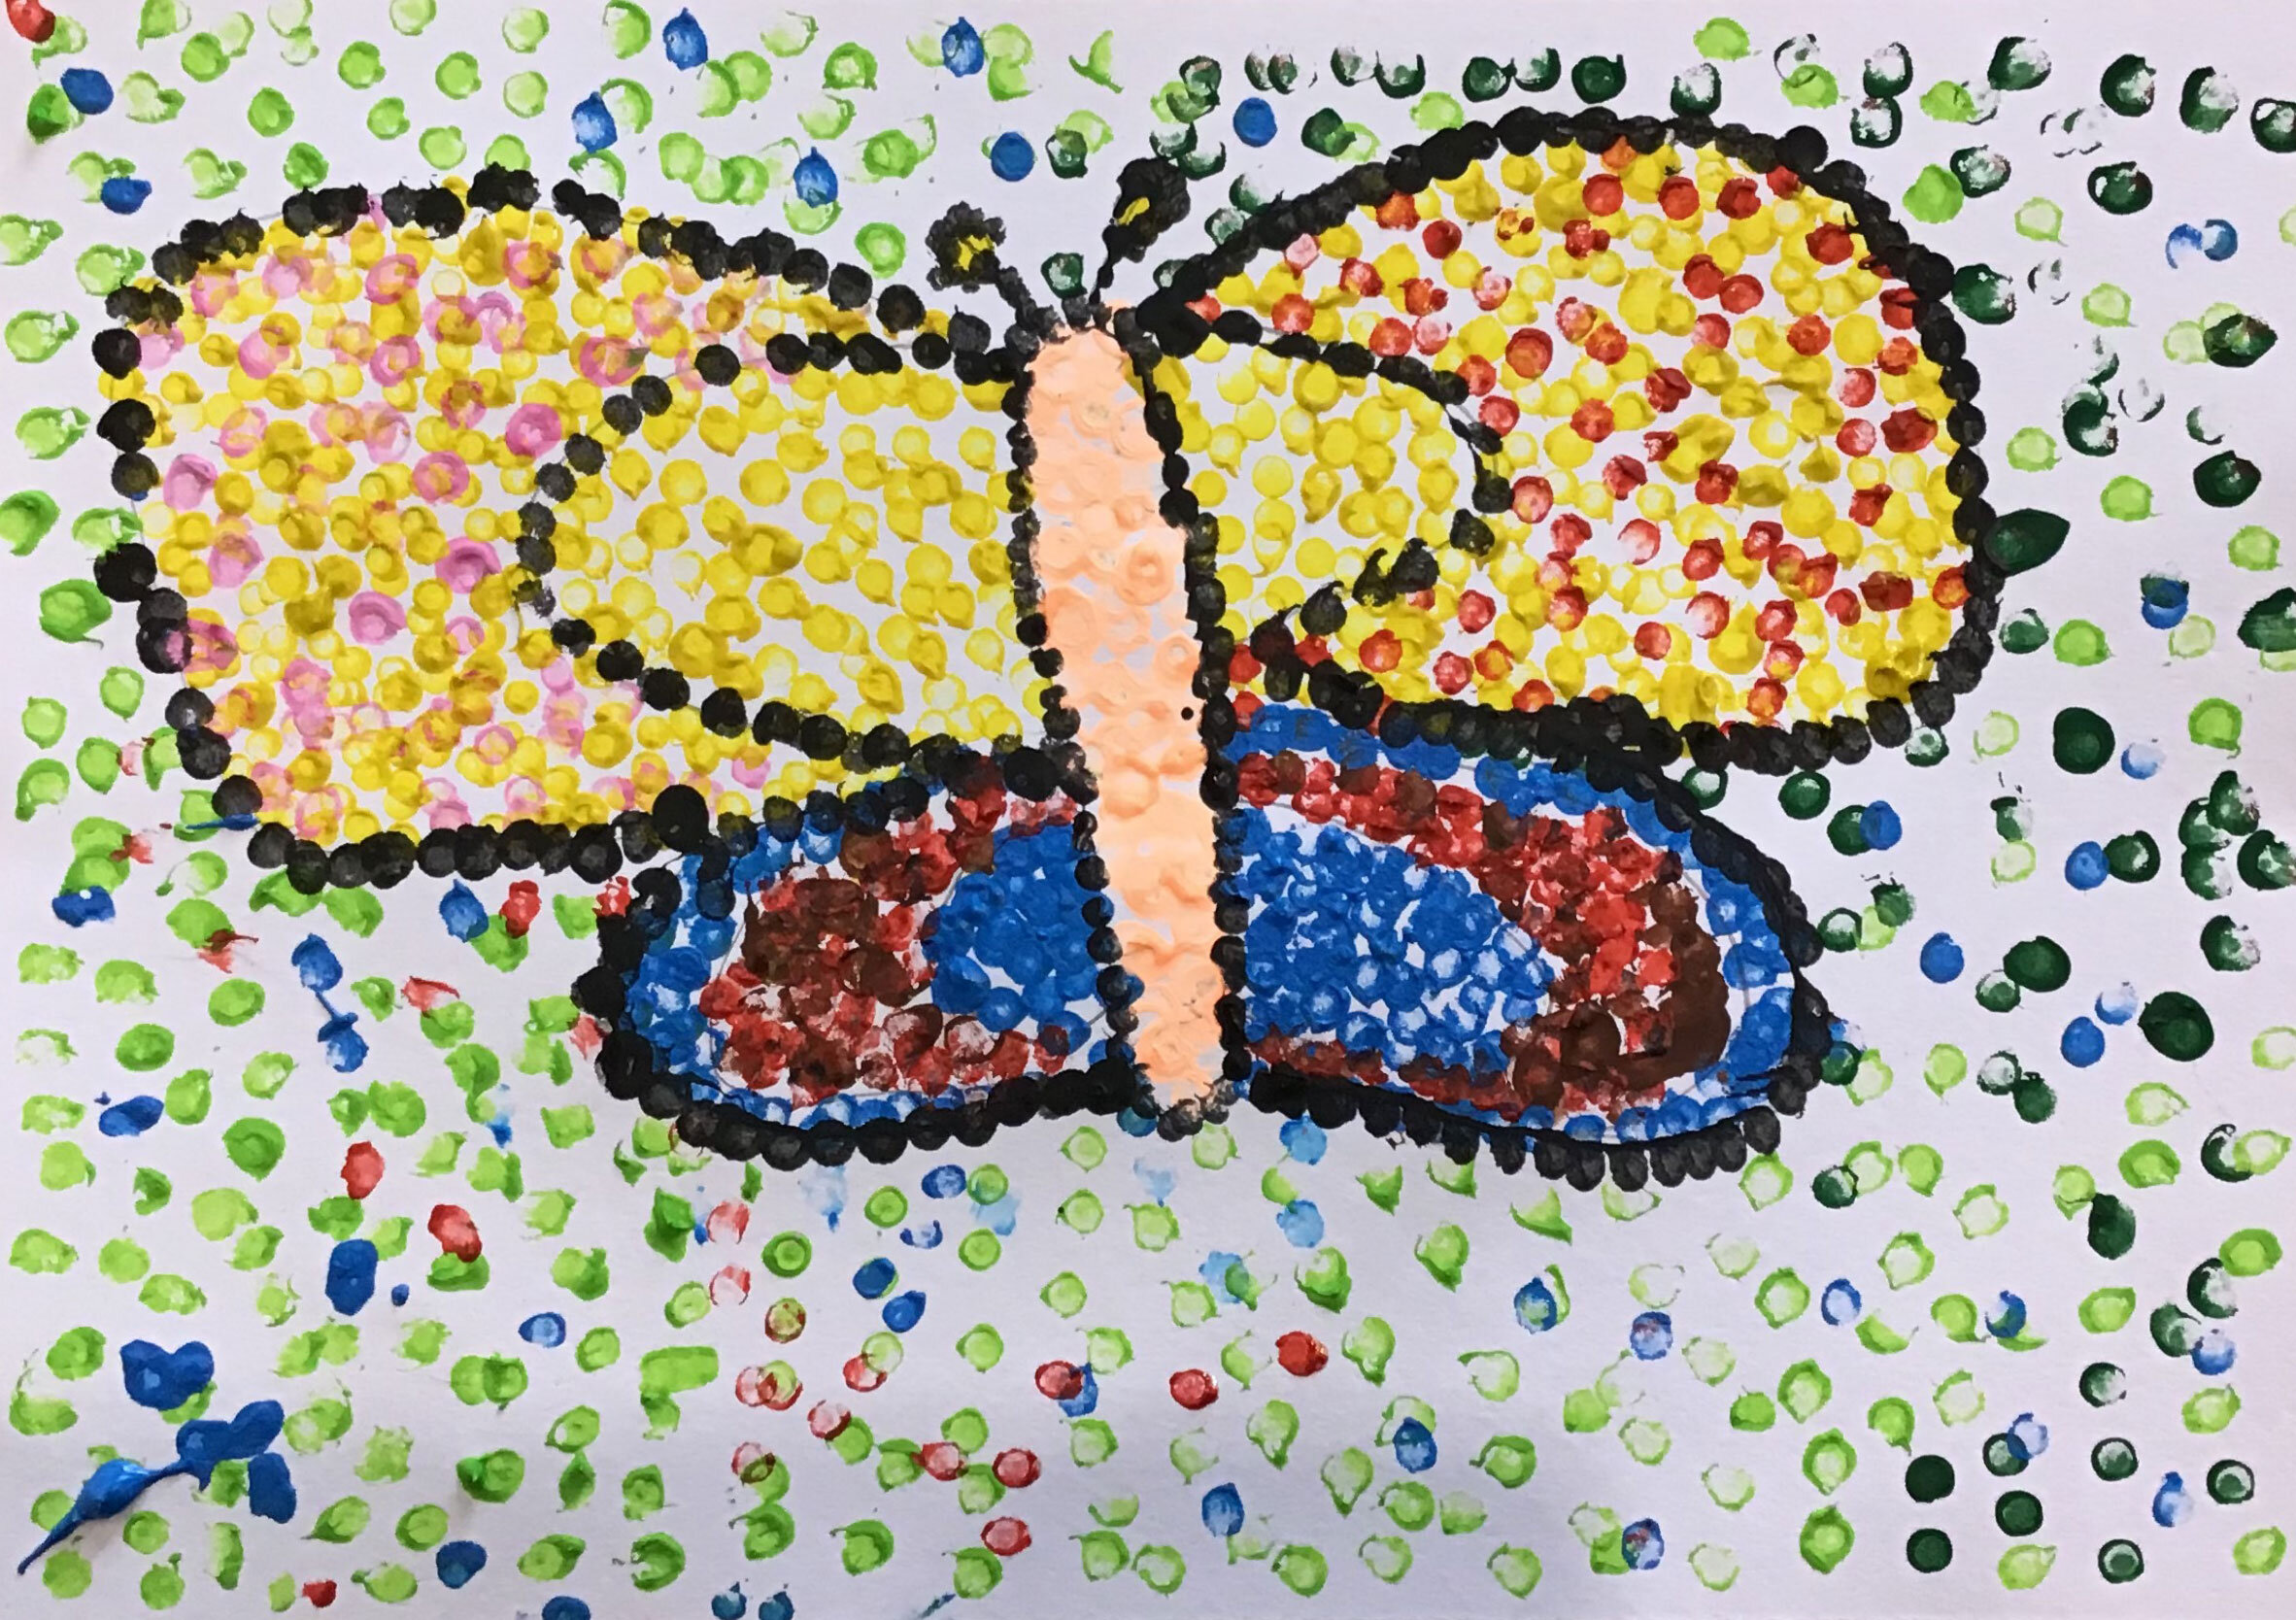 Butterfly by Freya Duncan age 6